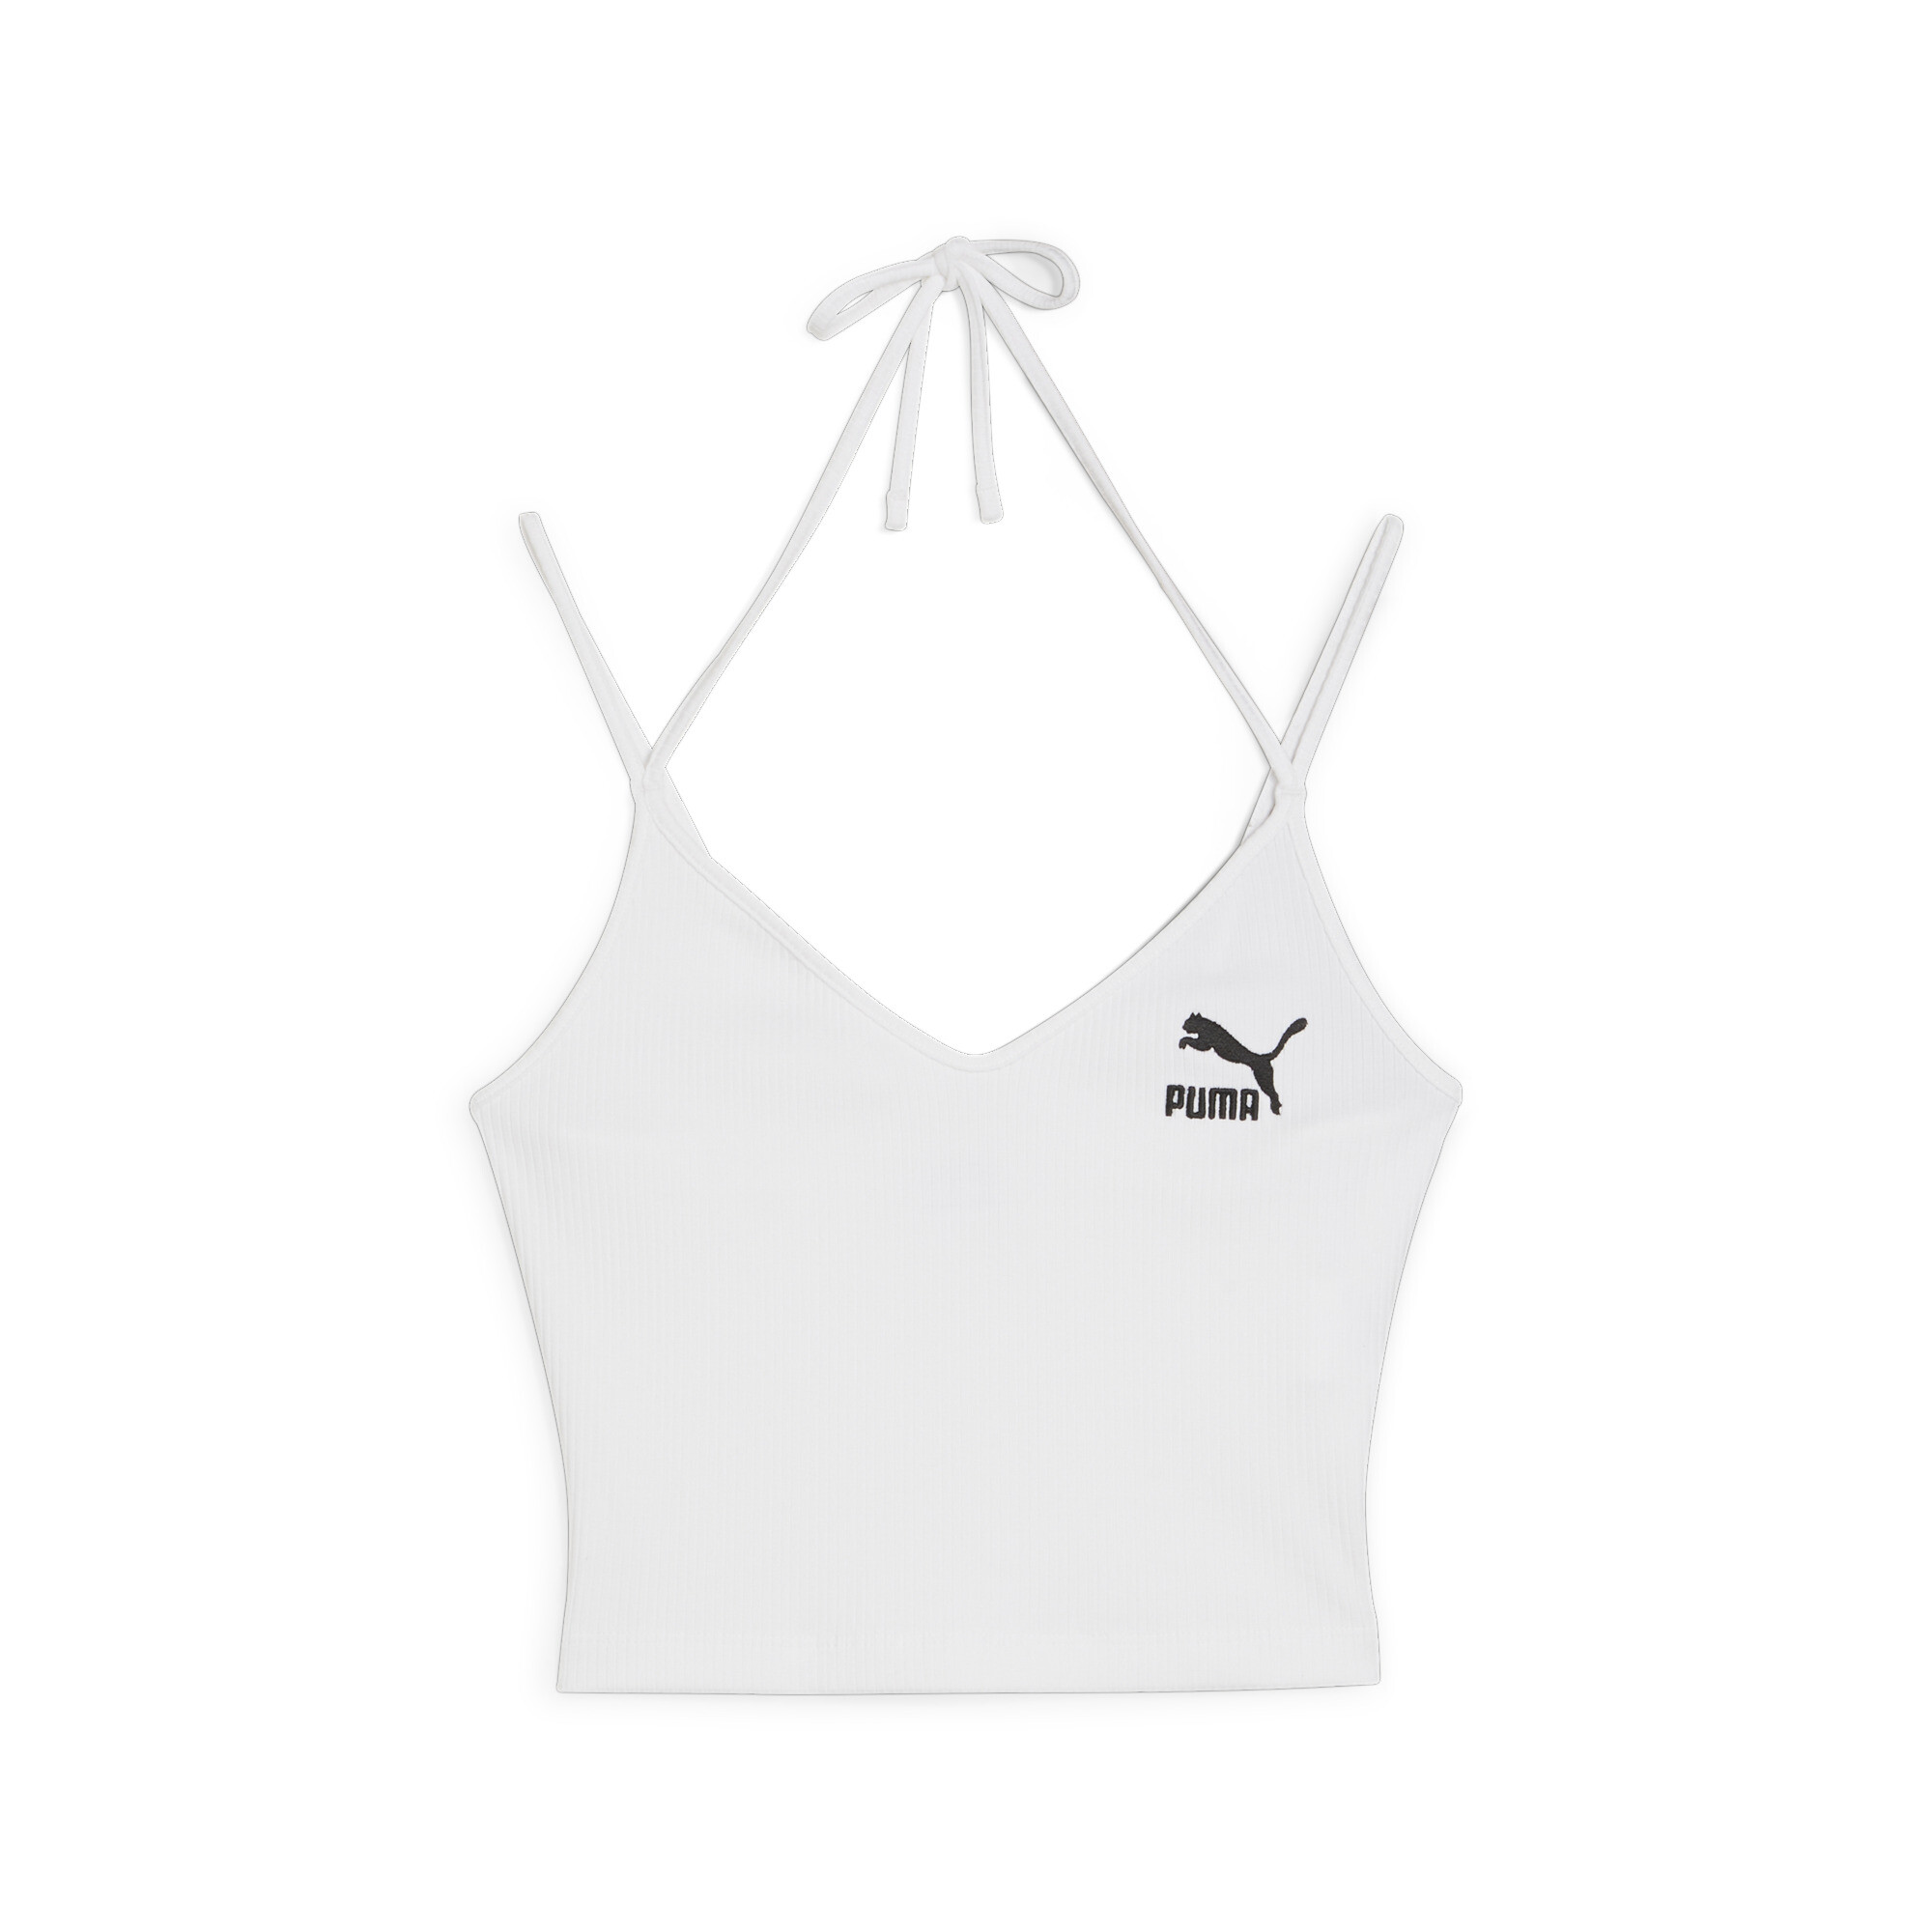 Women's PUMA CLASSICS Ribbed Crop Top In White, Size Small